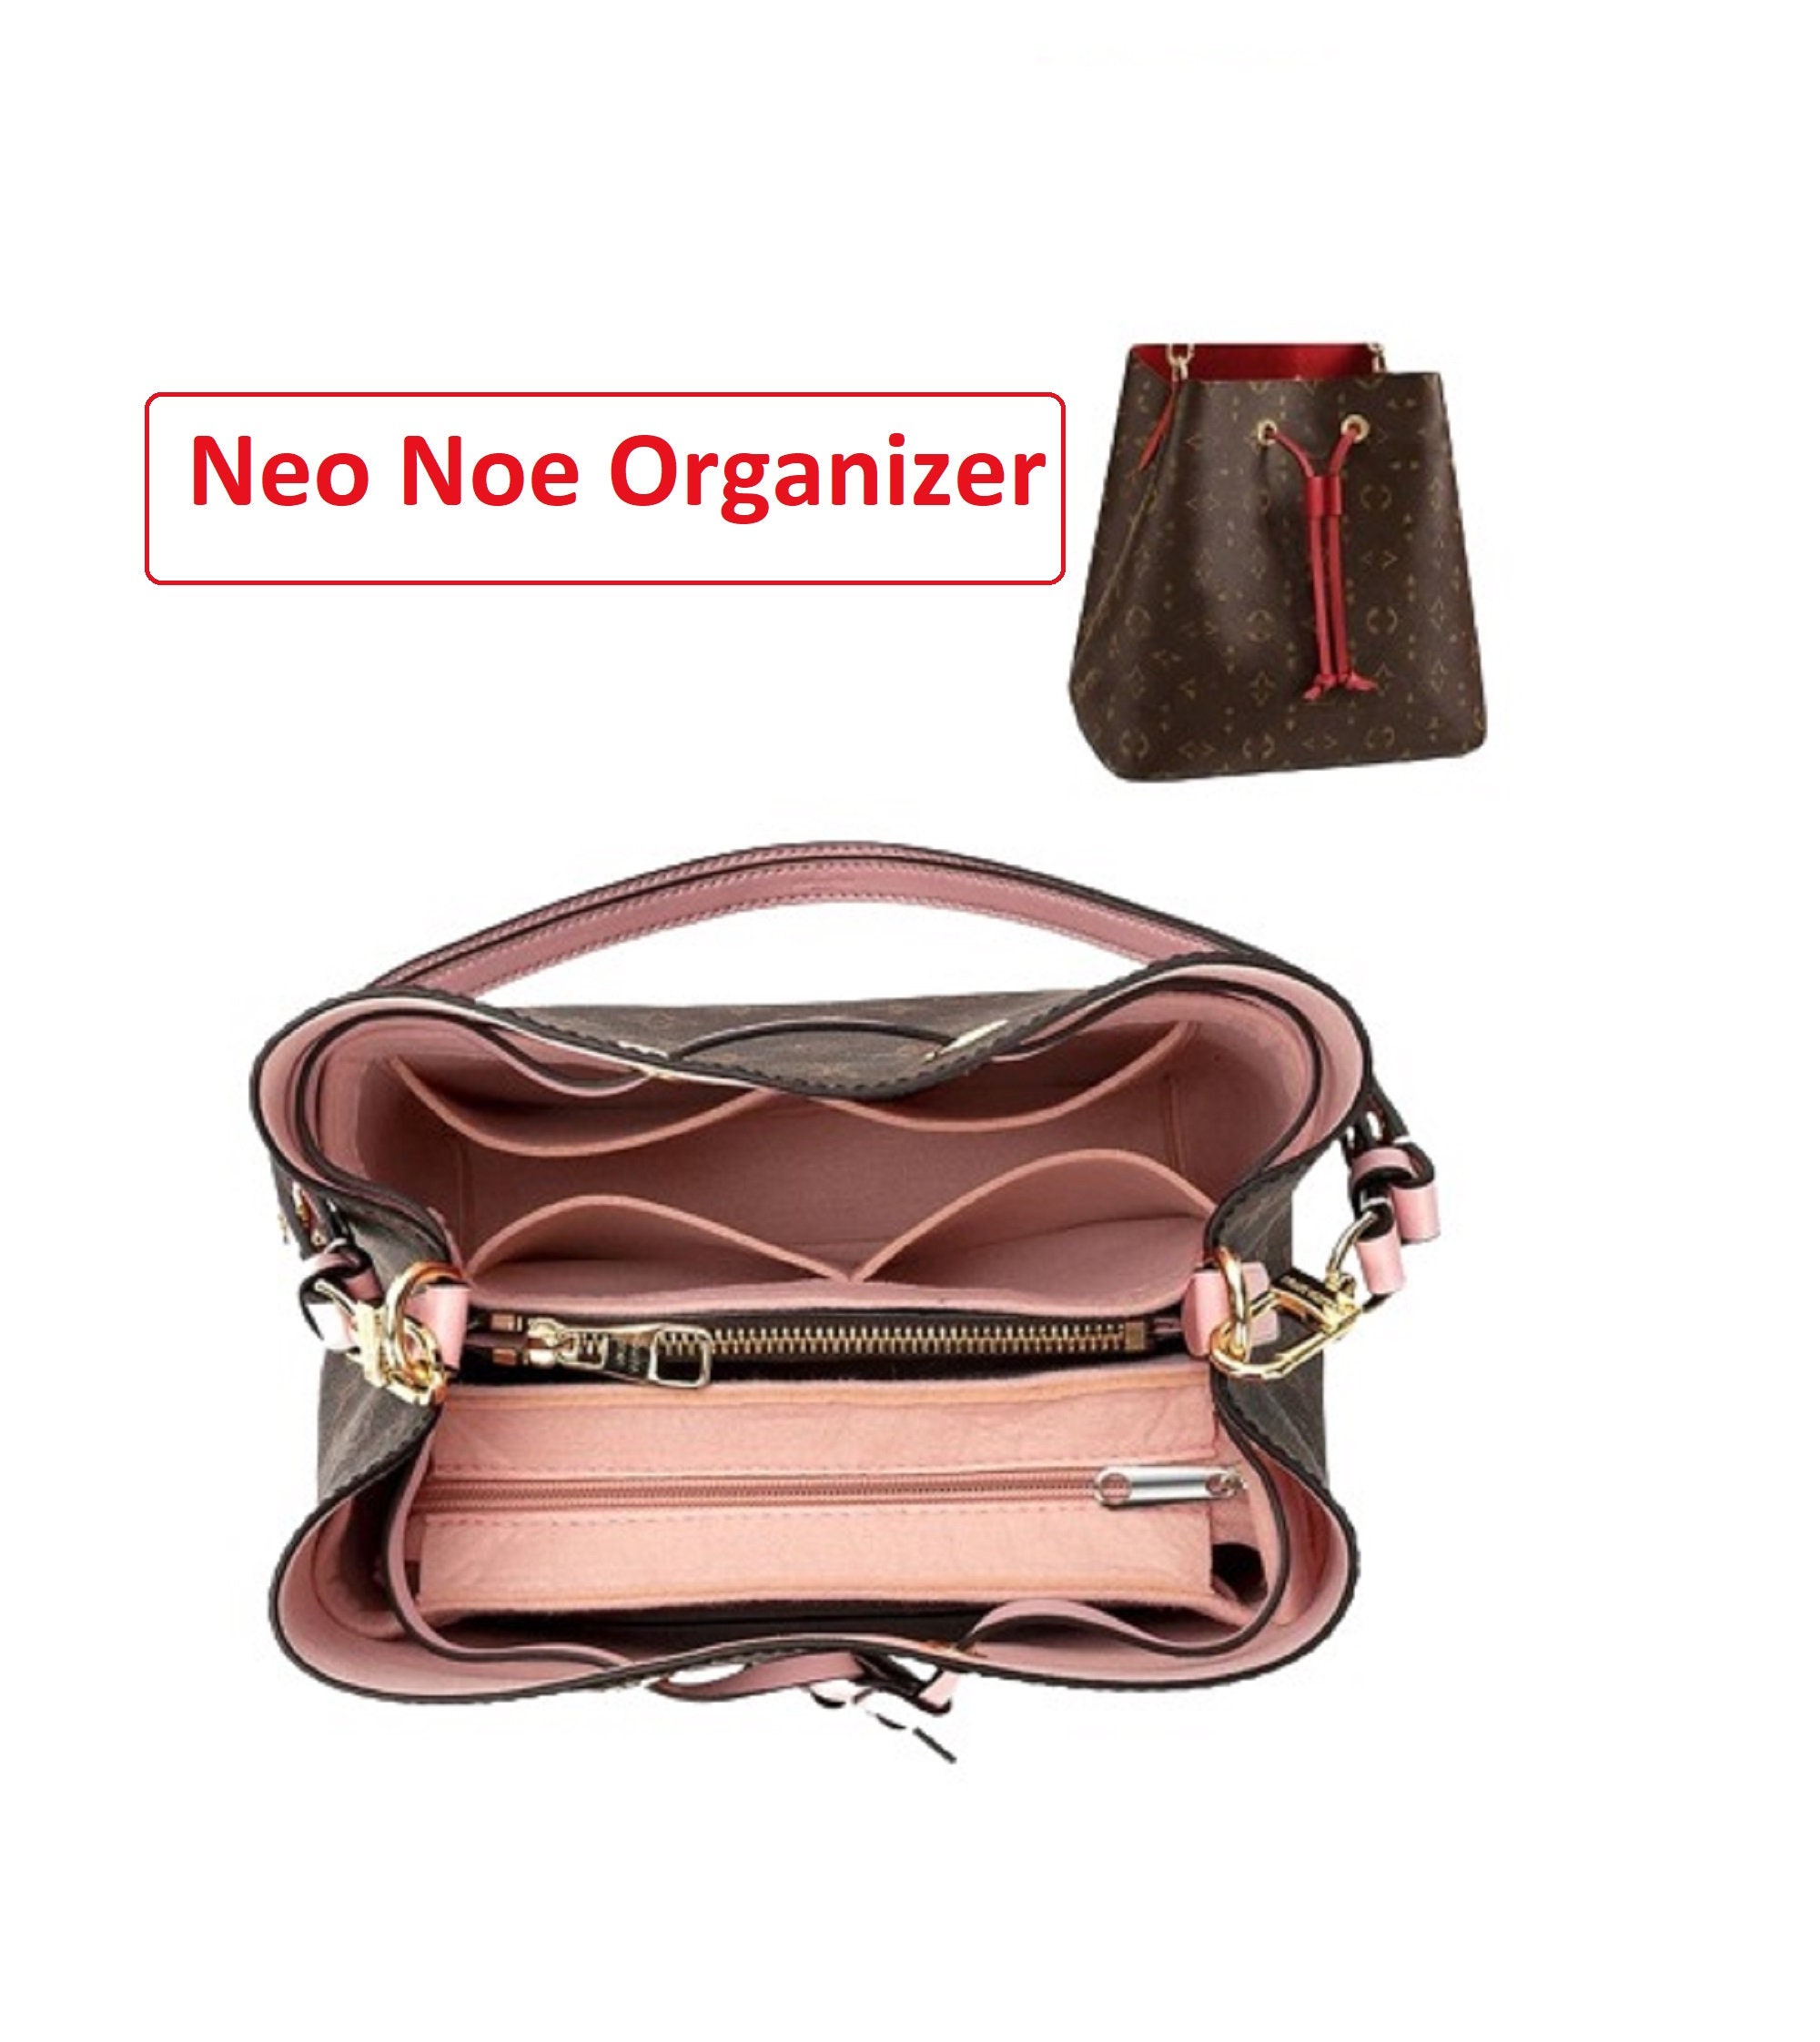 Bag Organizer,Misixile Bag Shaper Purse Insert Felt Organizer Fit in LV  NeoNoe Noé and other Bucket Bags.